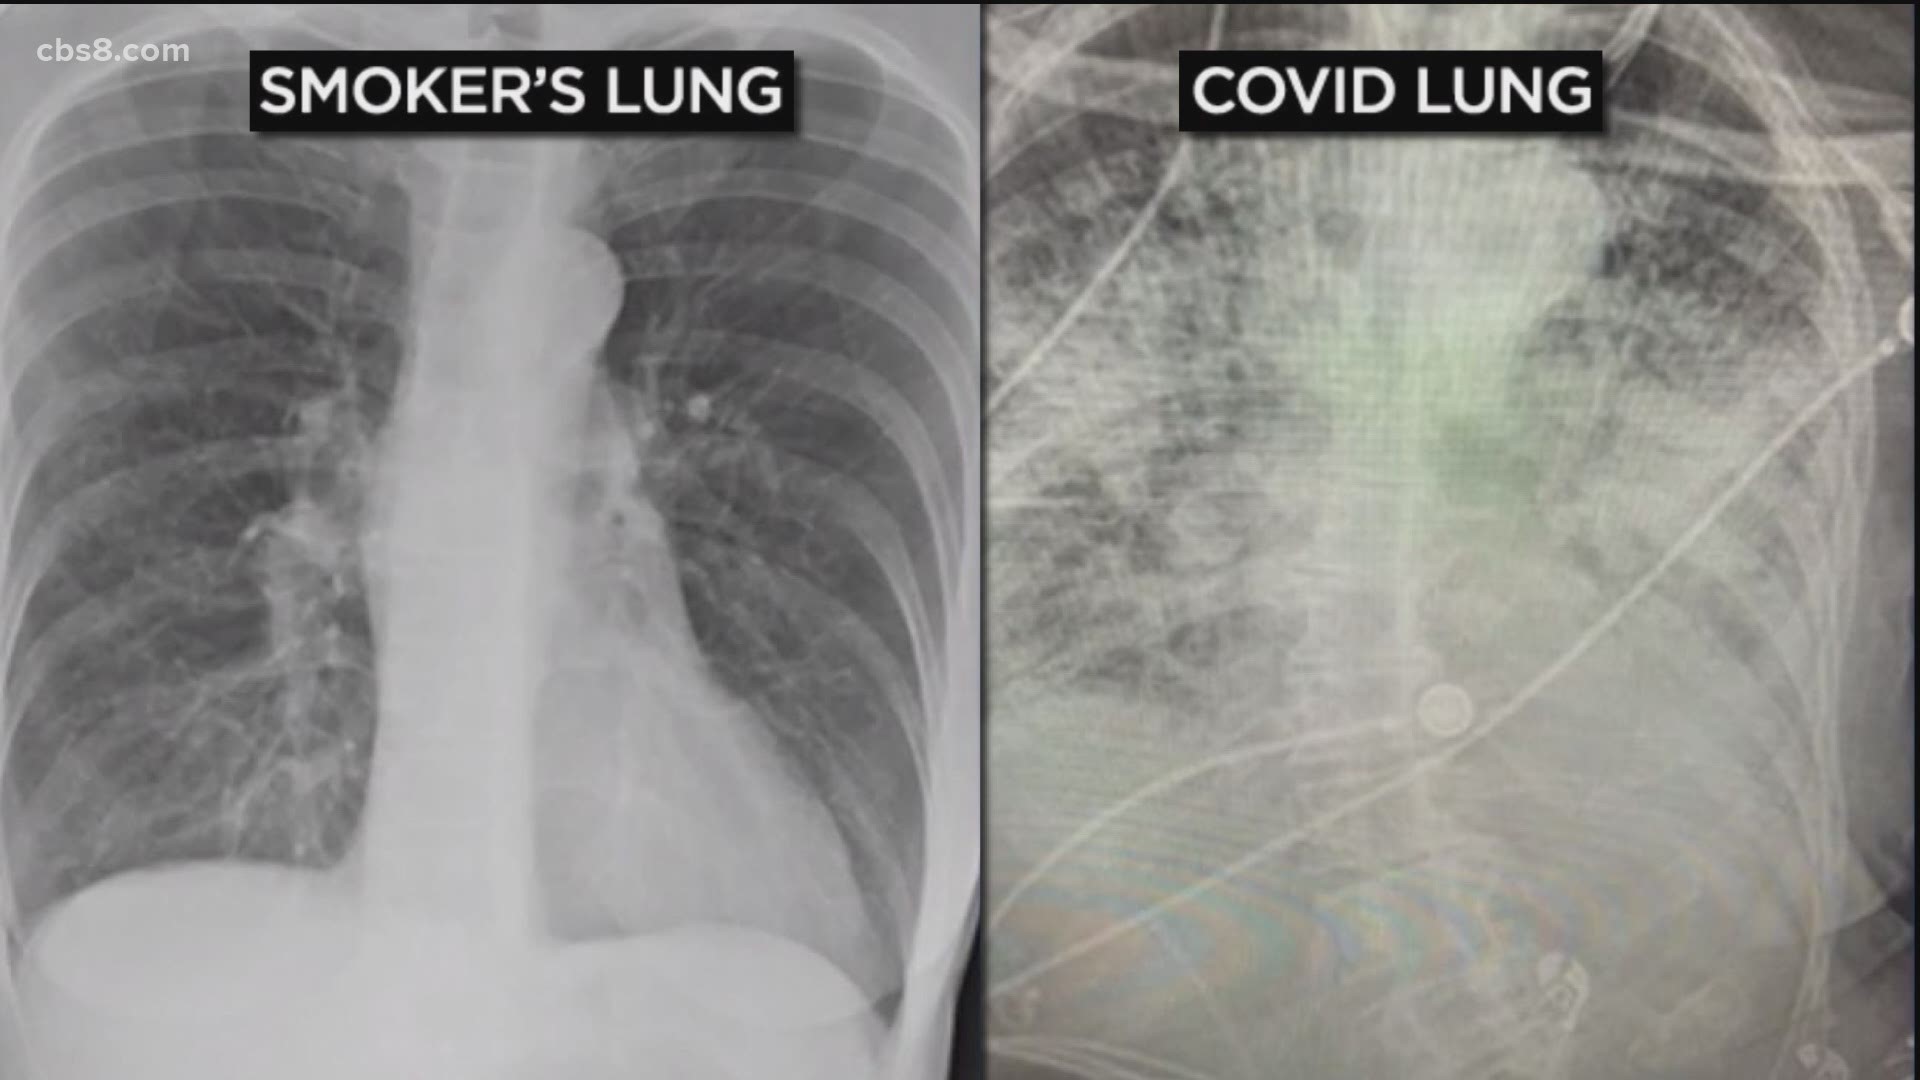 A pulmonary critical care doctor breaks down how lung damage of recovering COVID-19 patients compares to lung damage from habitual smoking.